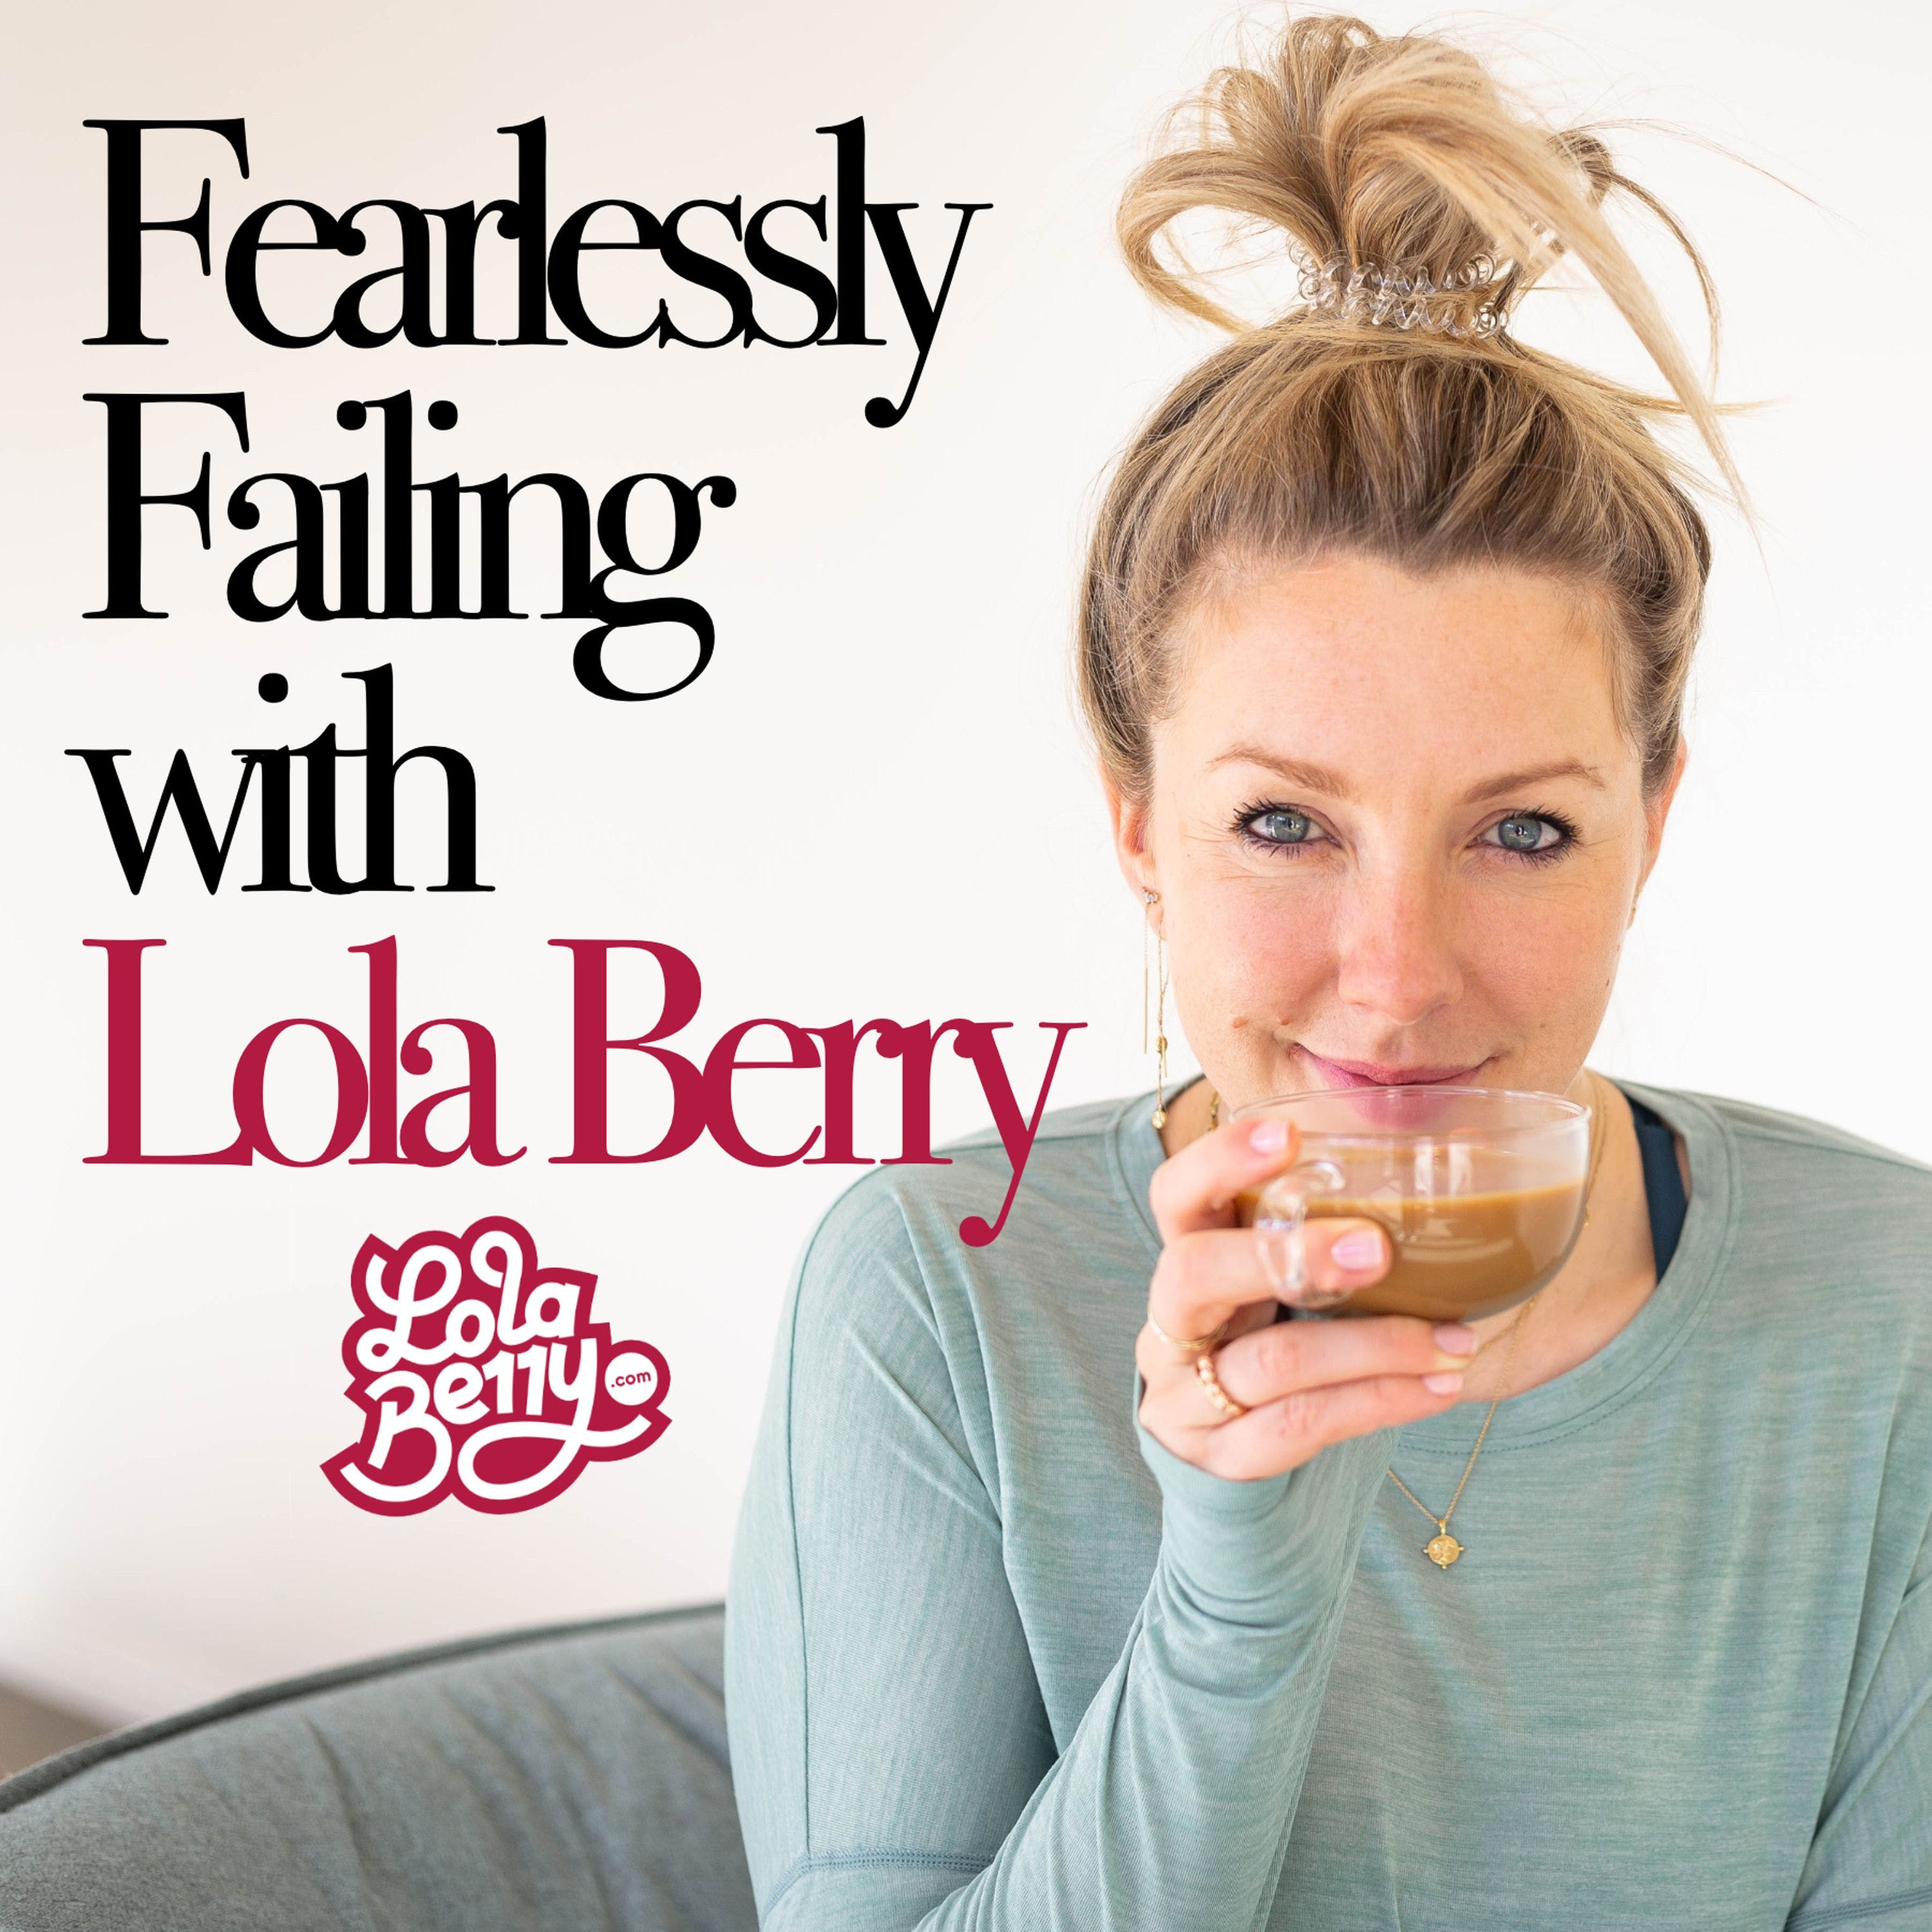 43. Fearlessly Failing: Abby Gilmore